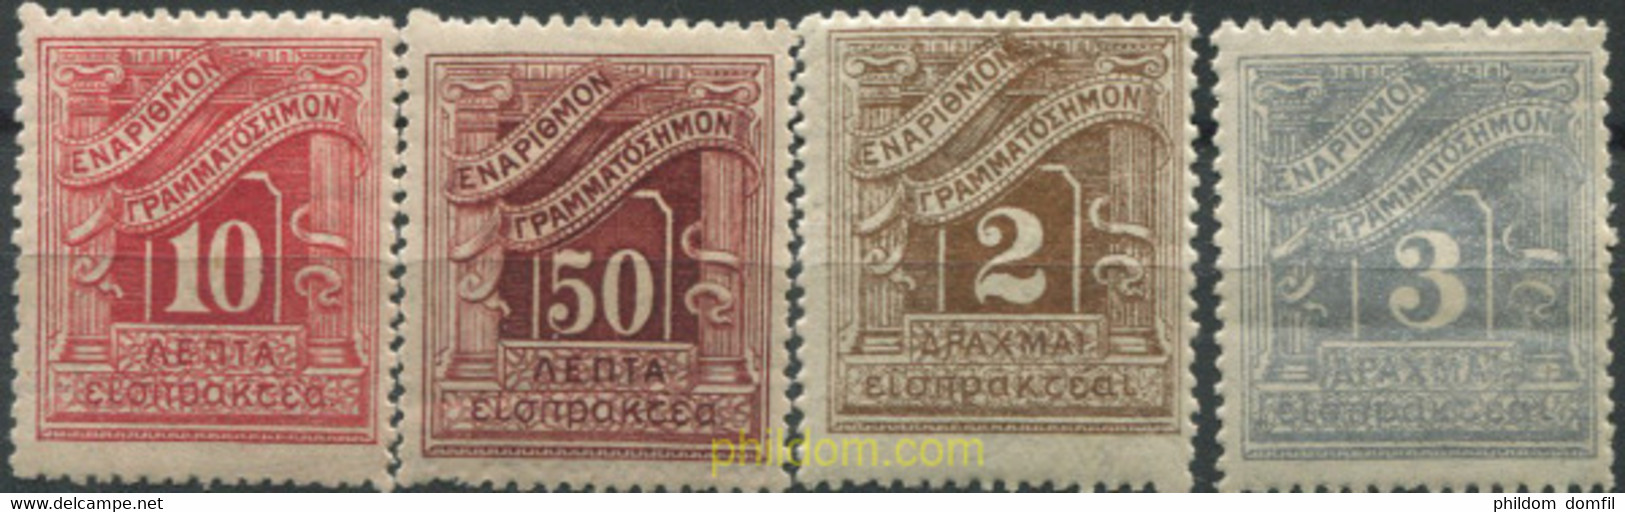 668292 HINGED GRECIA 1902 TASAS - Used Stamps